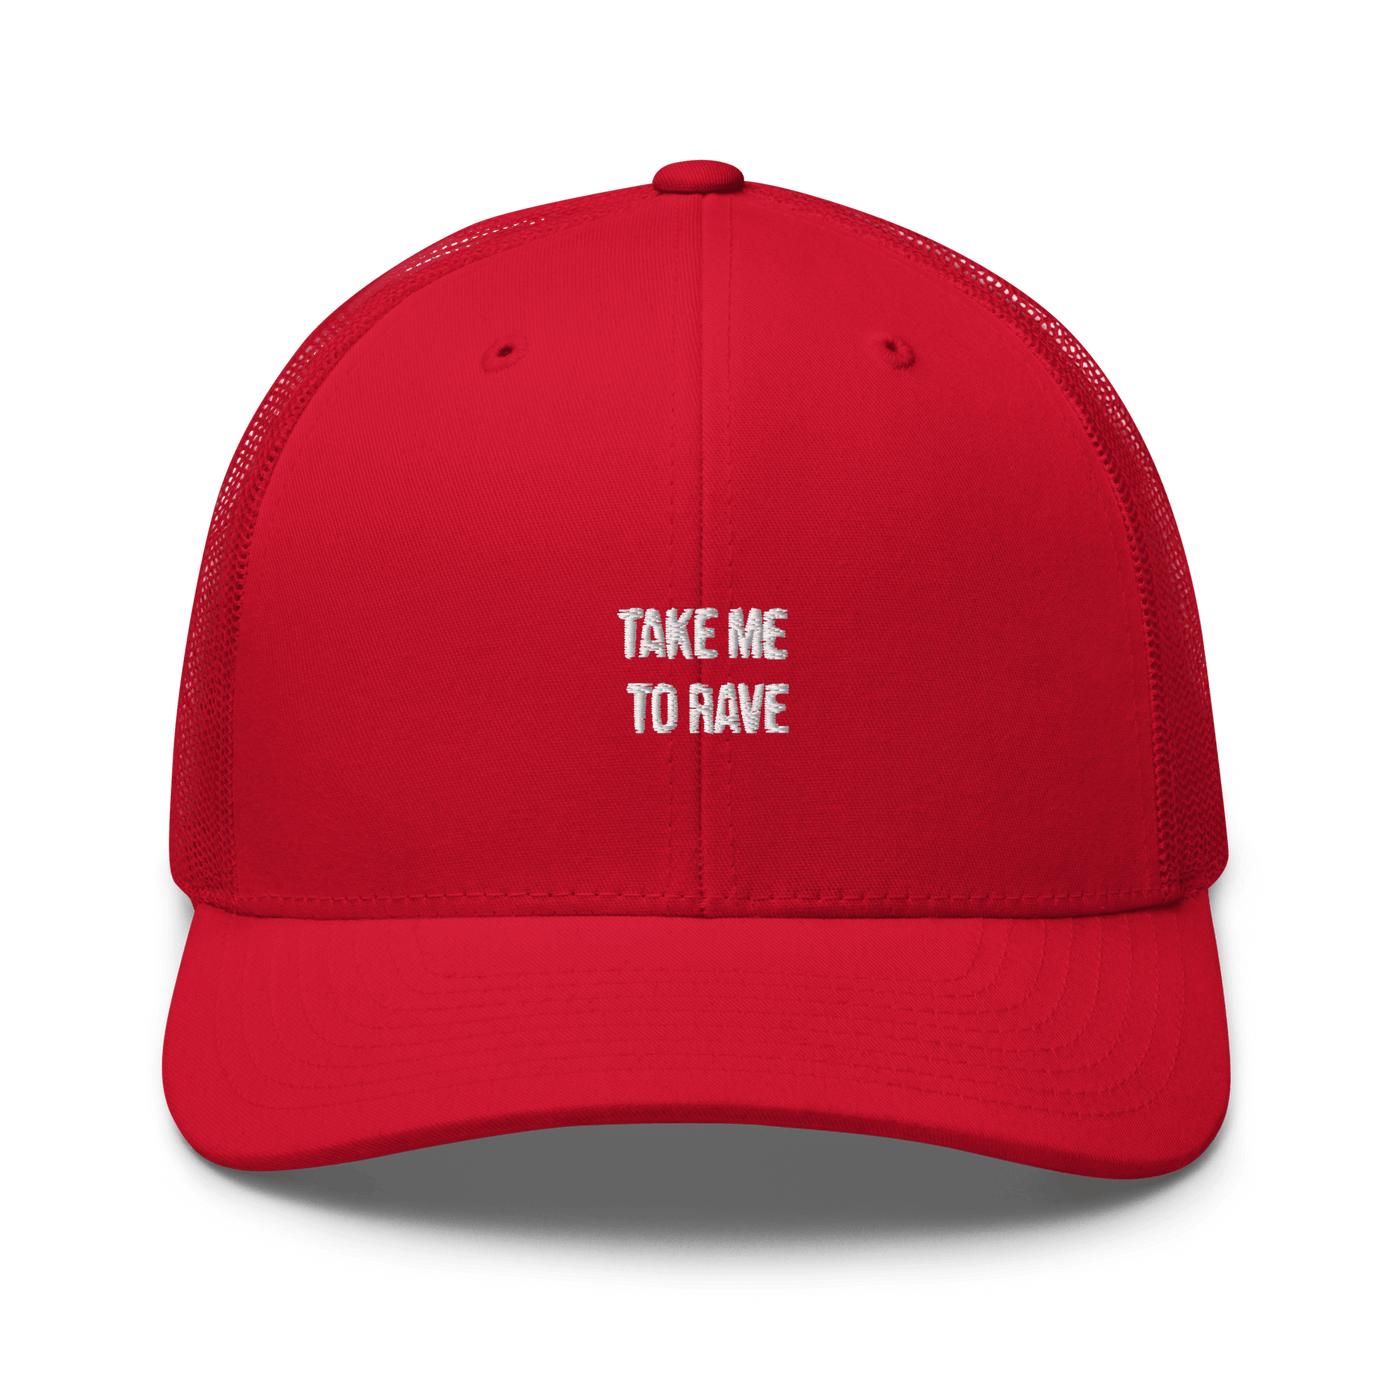 Take me to rave Trucker Cap - Navy - - Just Another Cap Store